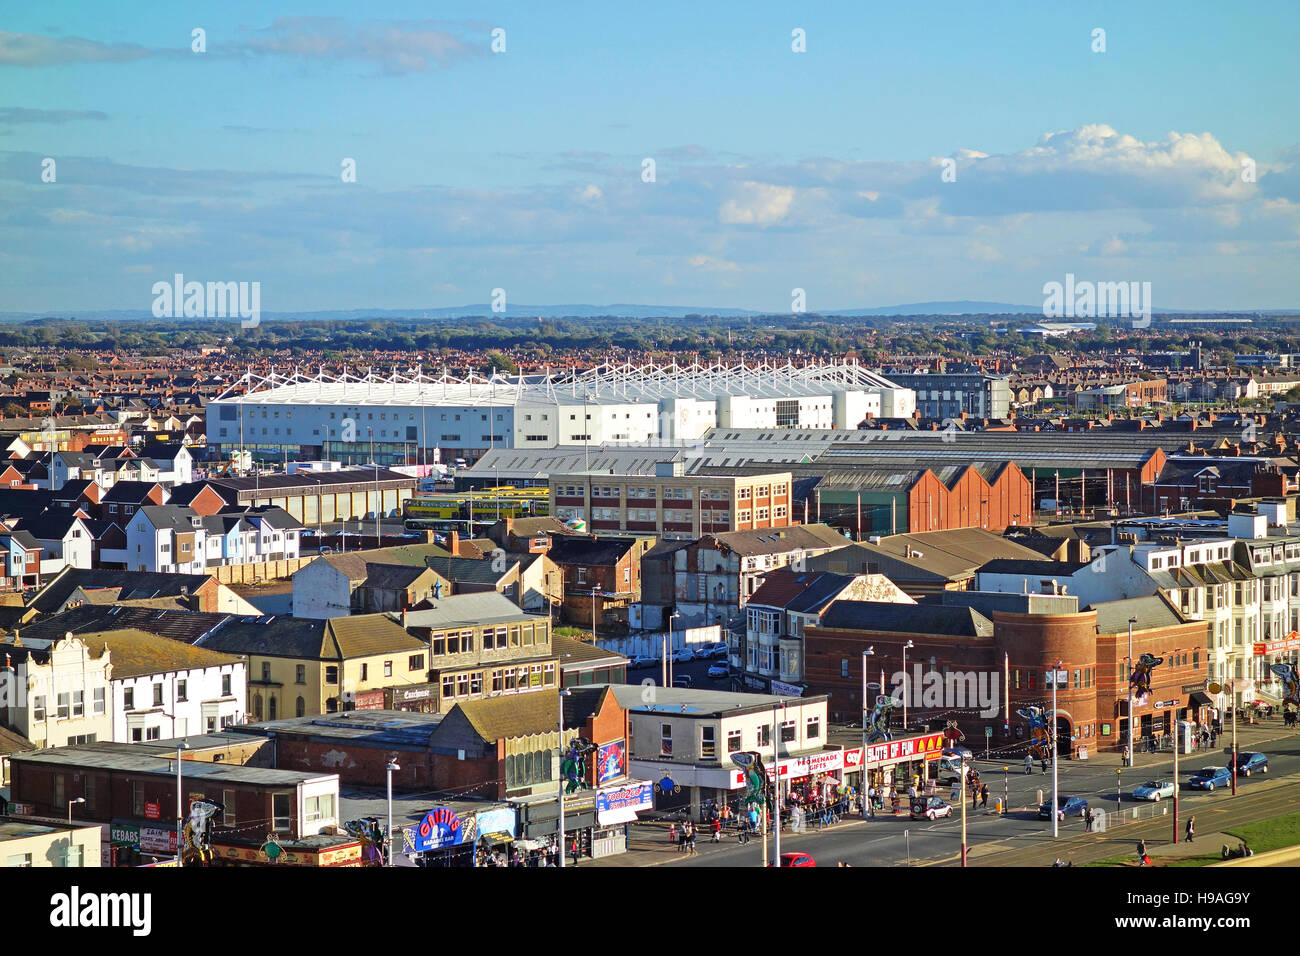 The town of Blackpool in Lancashire, England, UK. Stock Photo